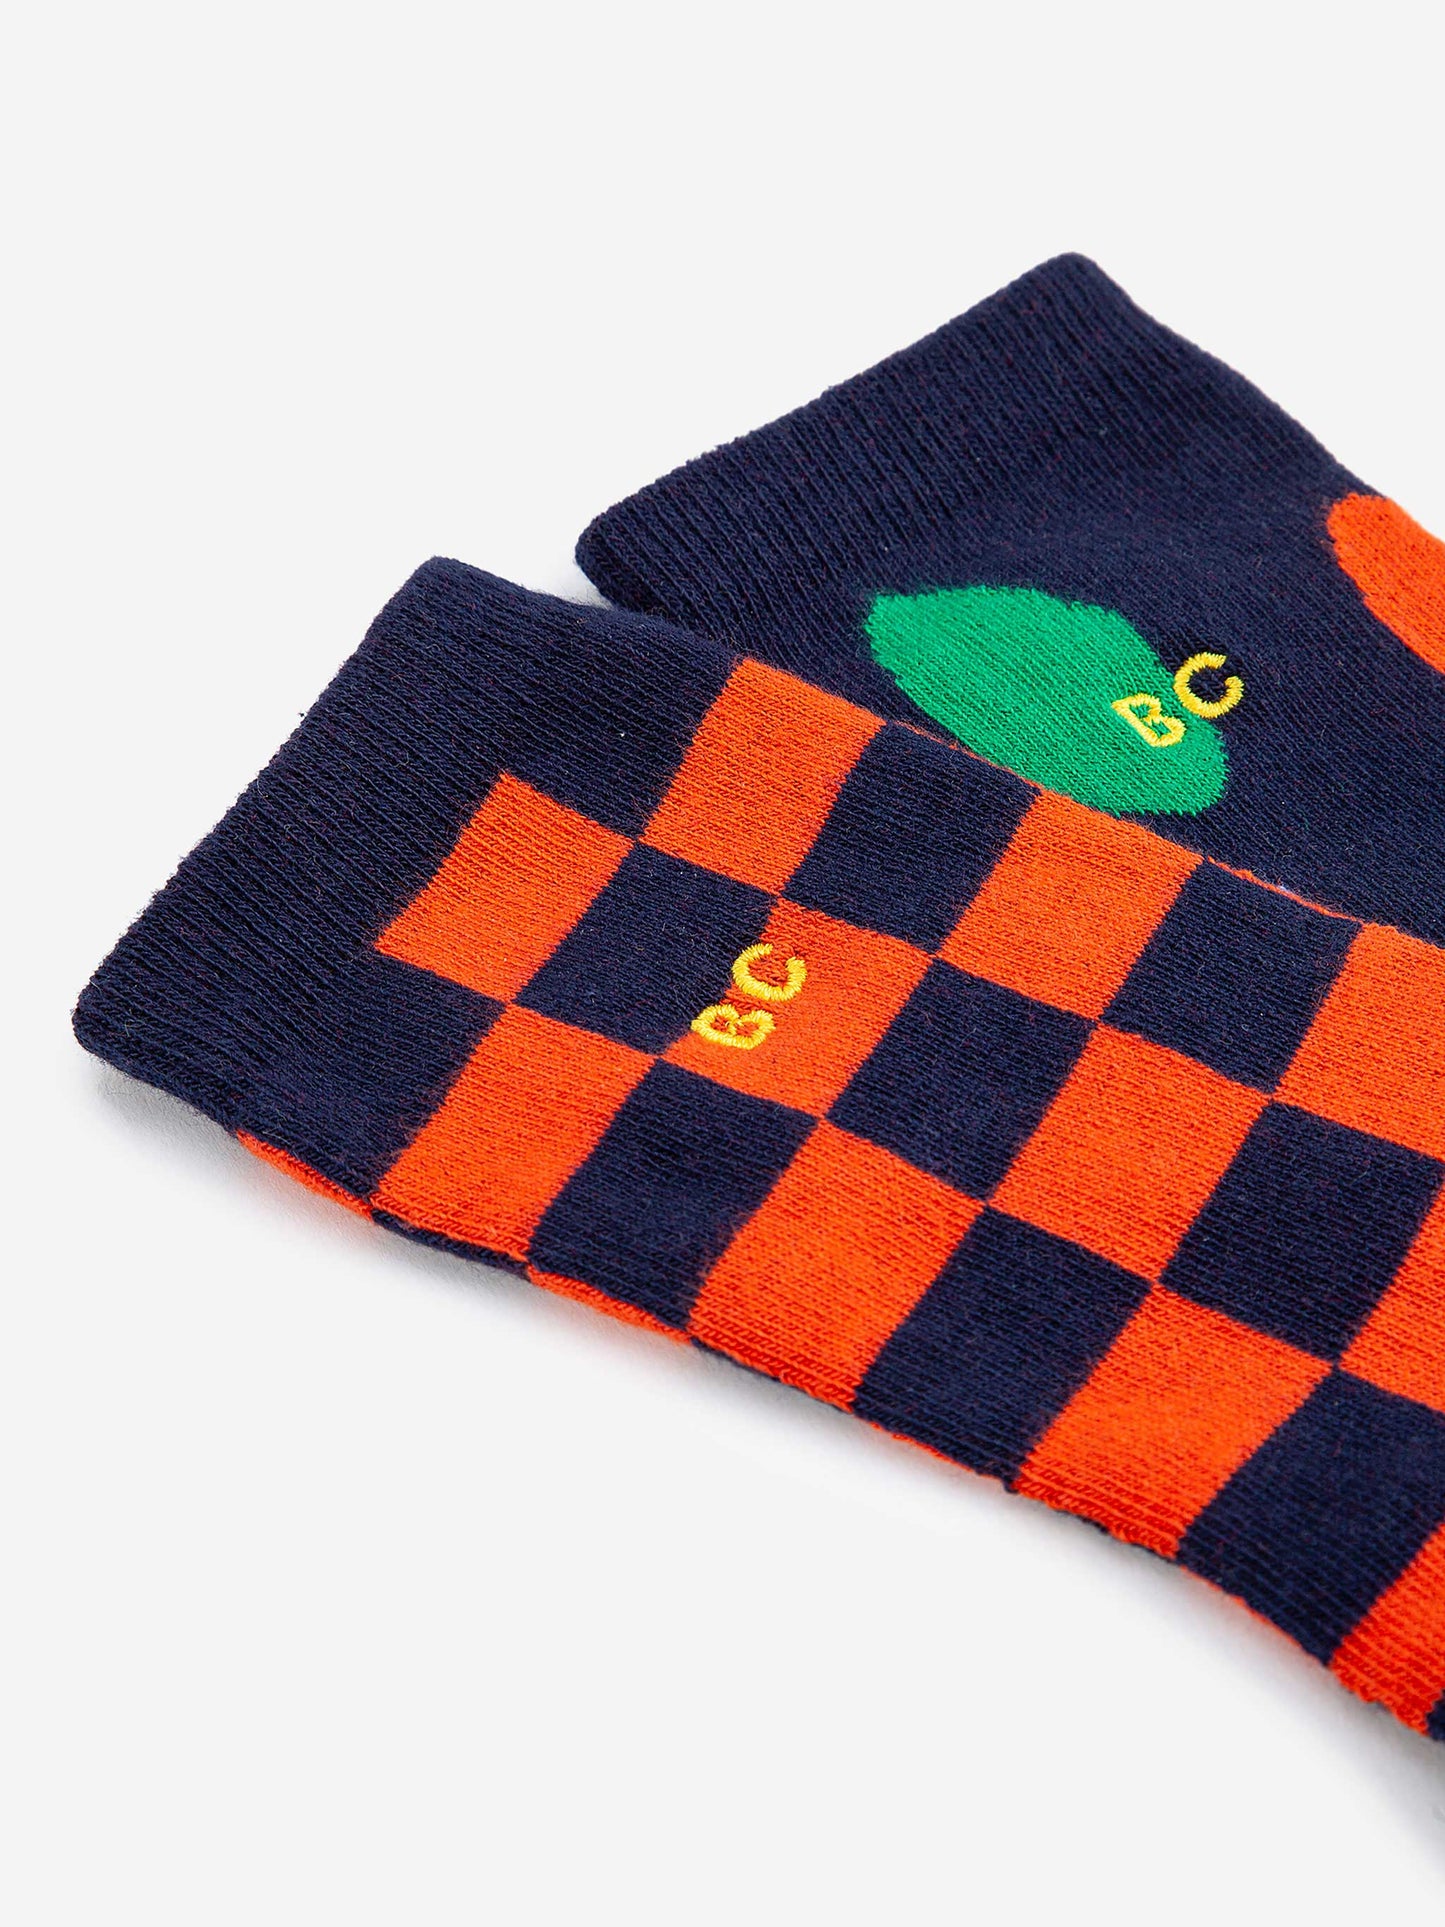 Party Time and Checkerboard long socks pack